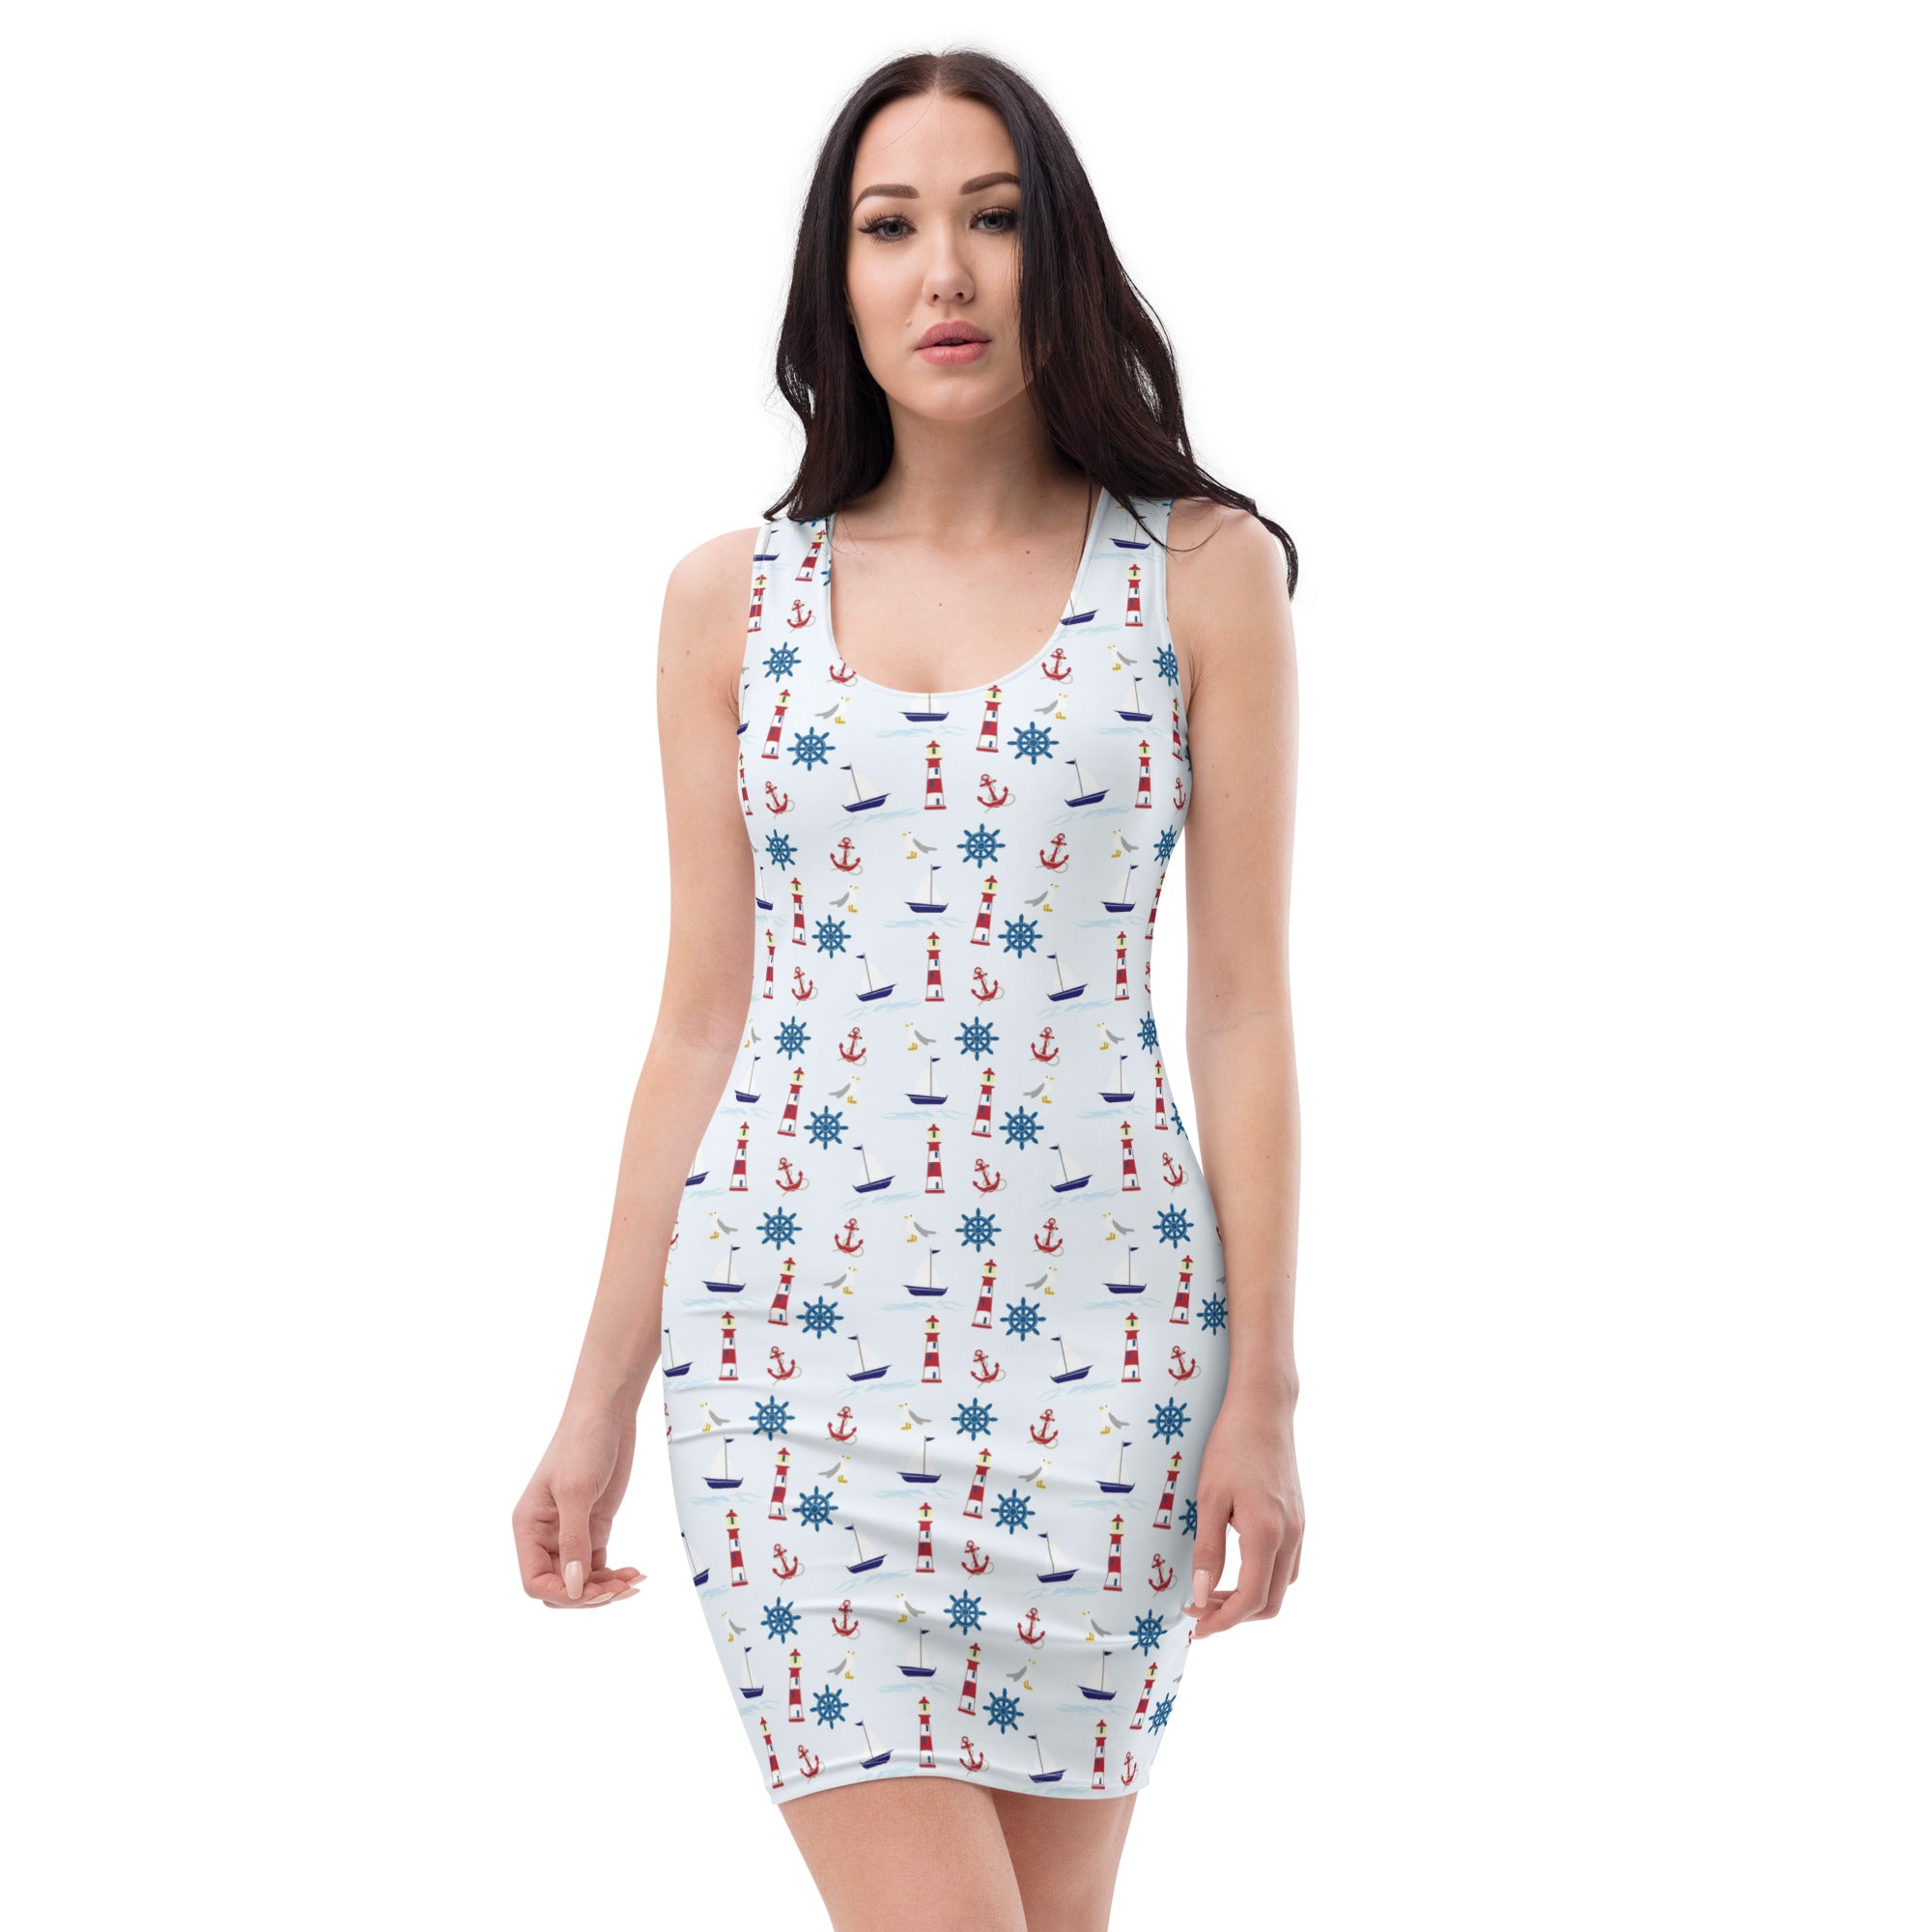 nautical themed dress with lighthouse, wheel, yacht and anchor design 